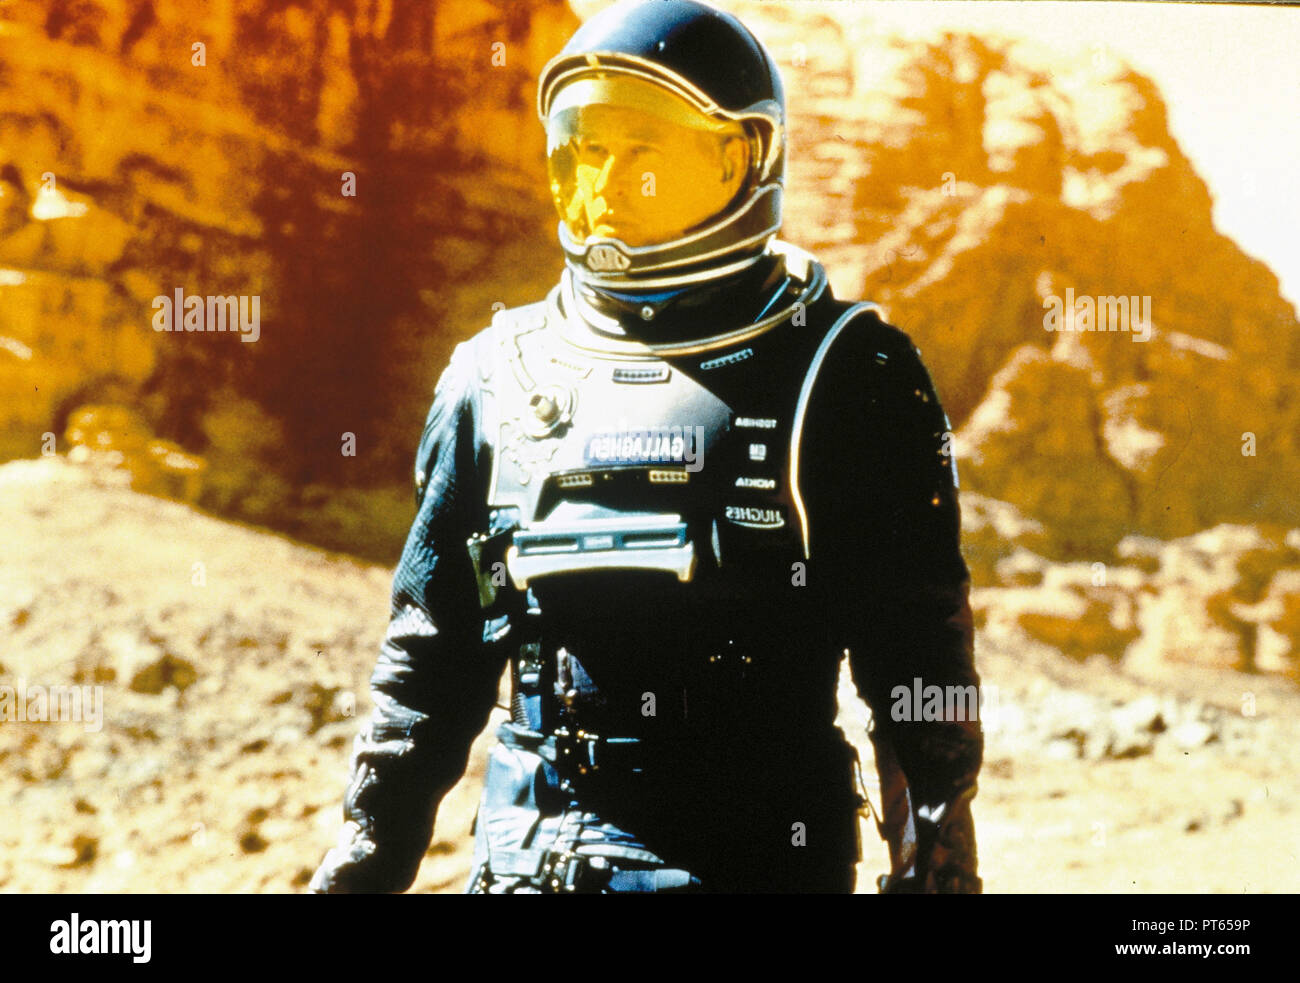 Original film title: RED PLANET. English title: RED PLANET. Year: 2000. Director: ANTHONY HOFFMAN. Stars: VAL KILMER. Credit: WARNER BROS. PICTURES / Album Stock Photo